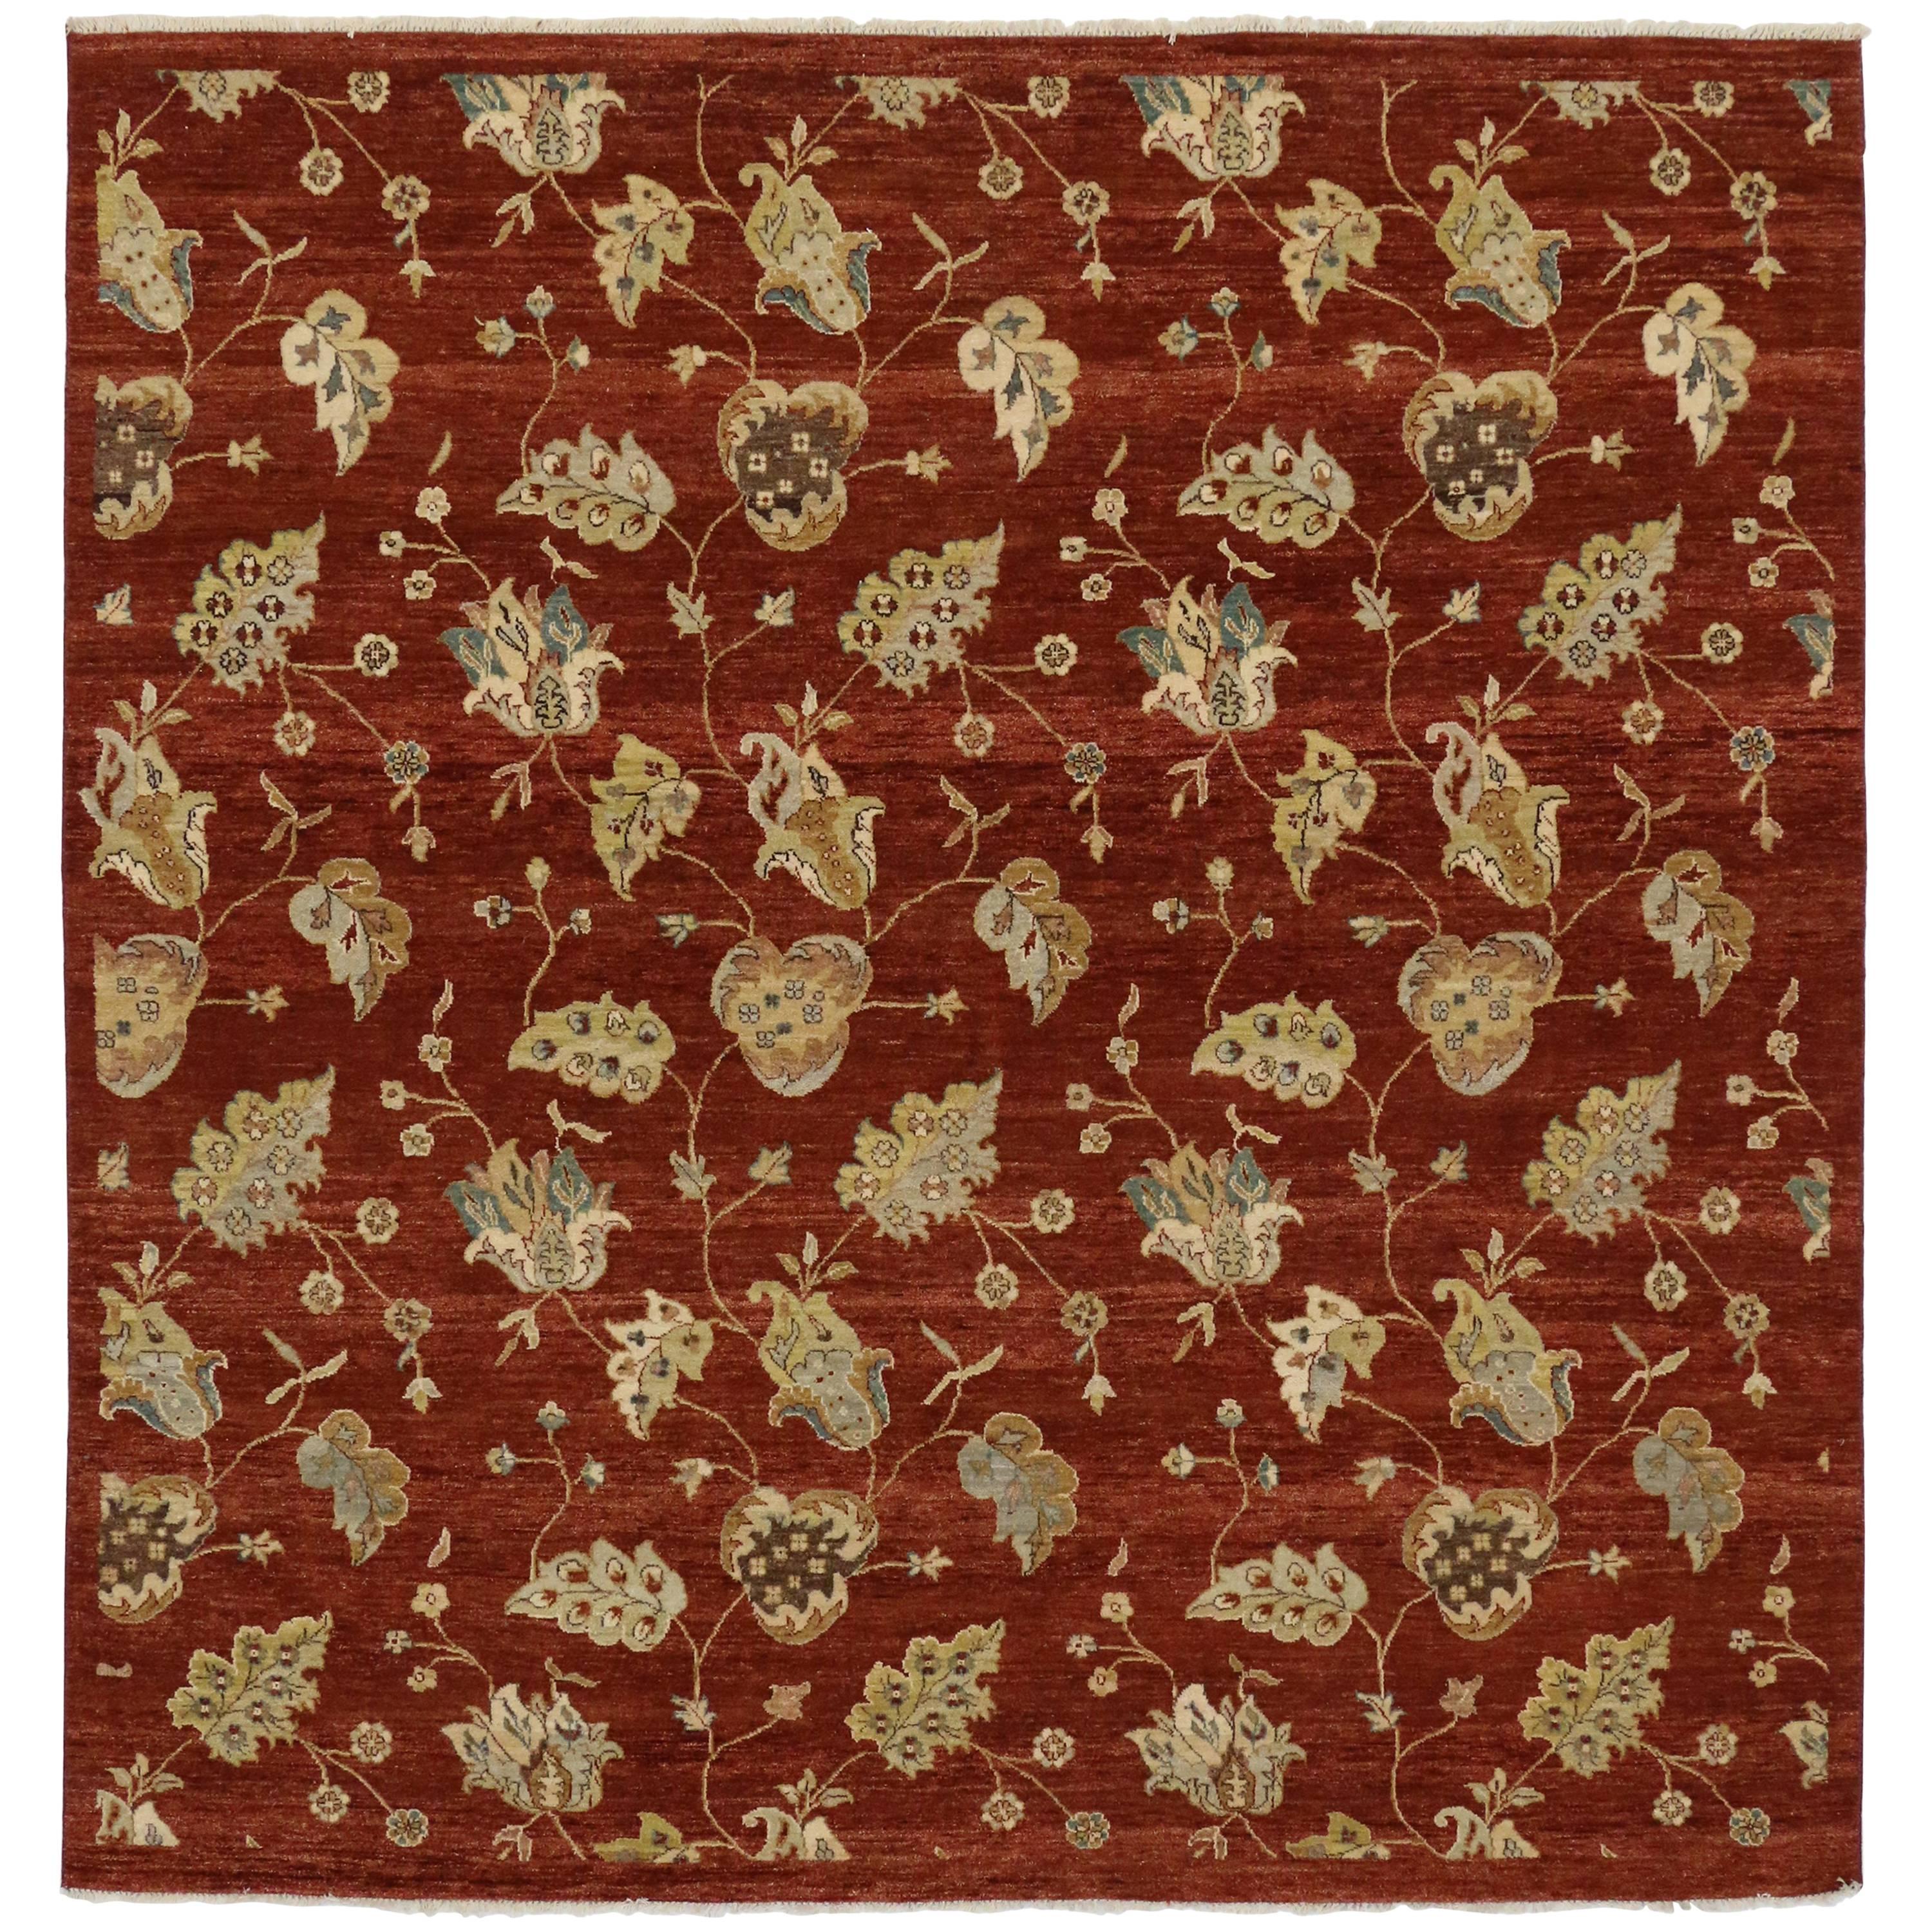 New Transitional Square Rug with Modern Style, Warm Indian Spice Tones